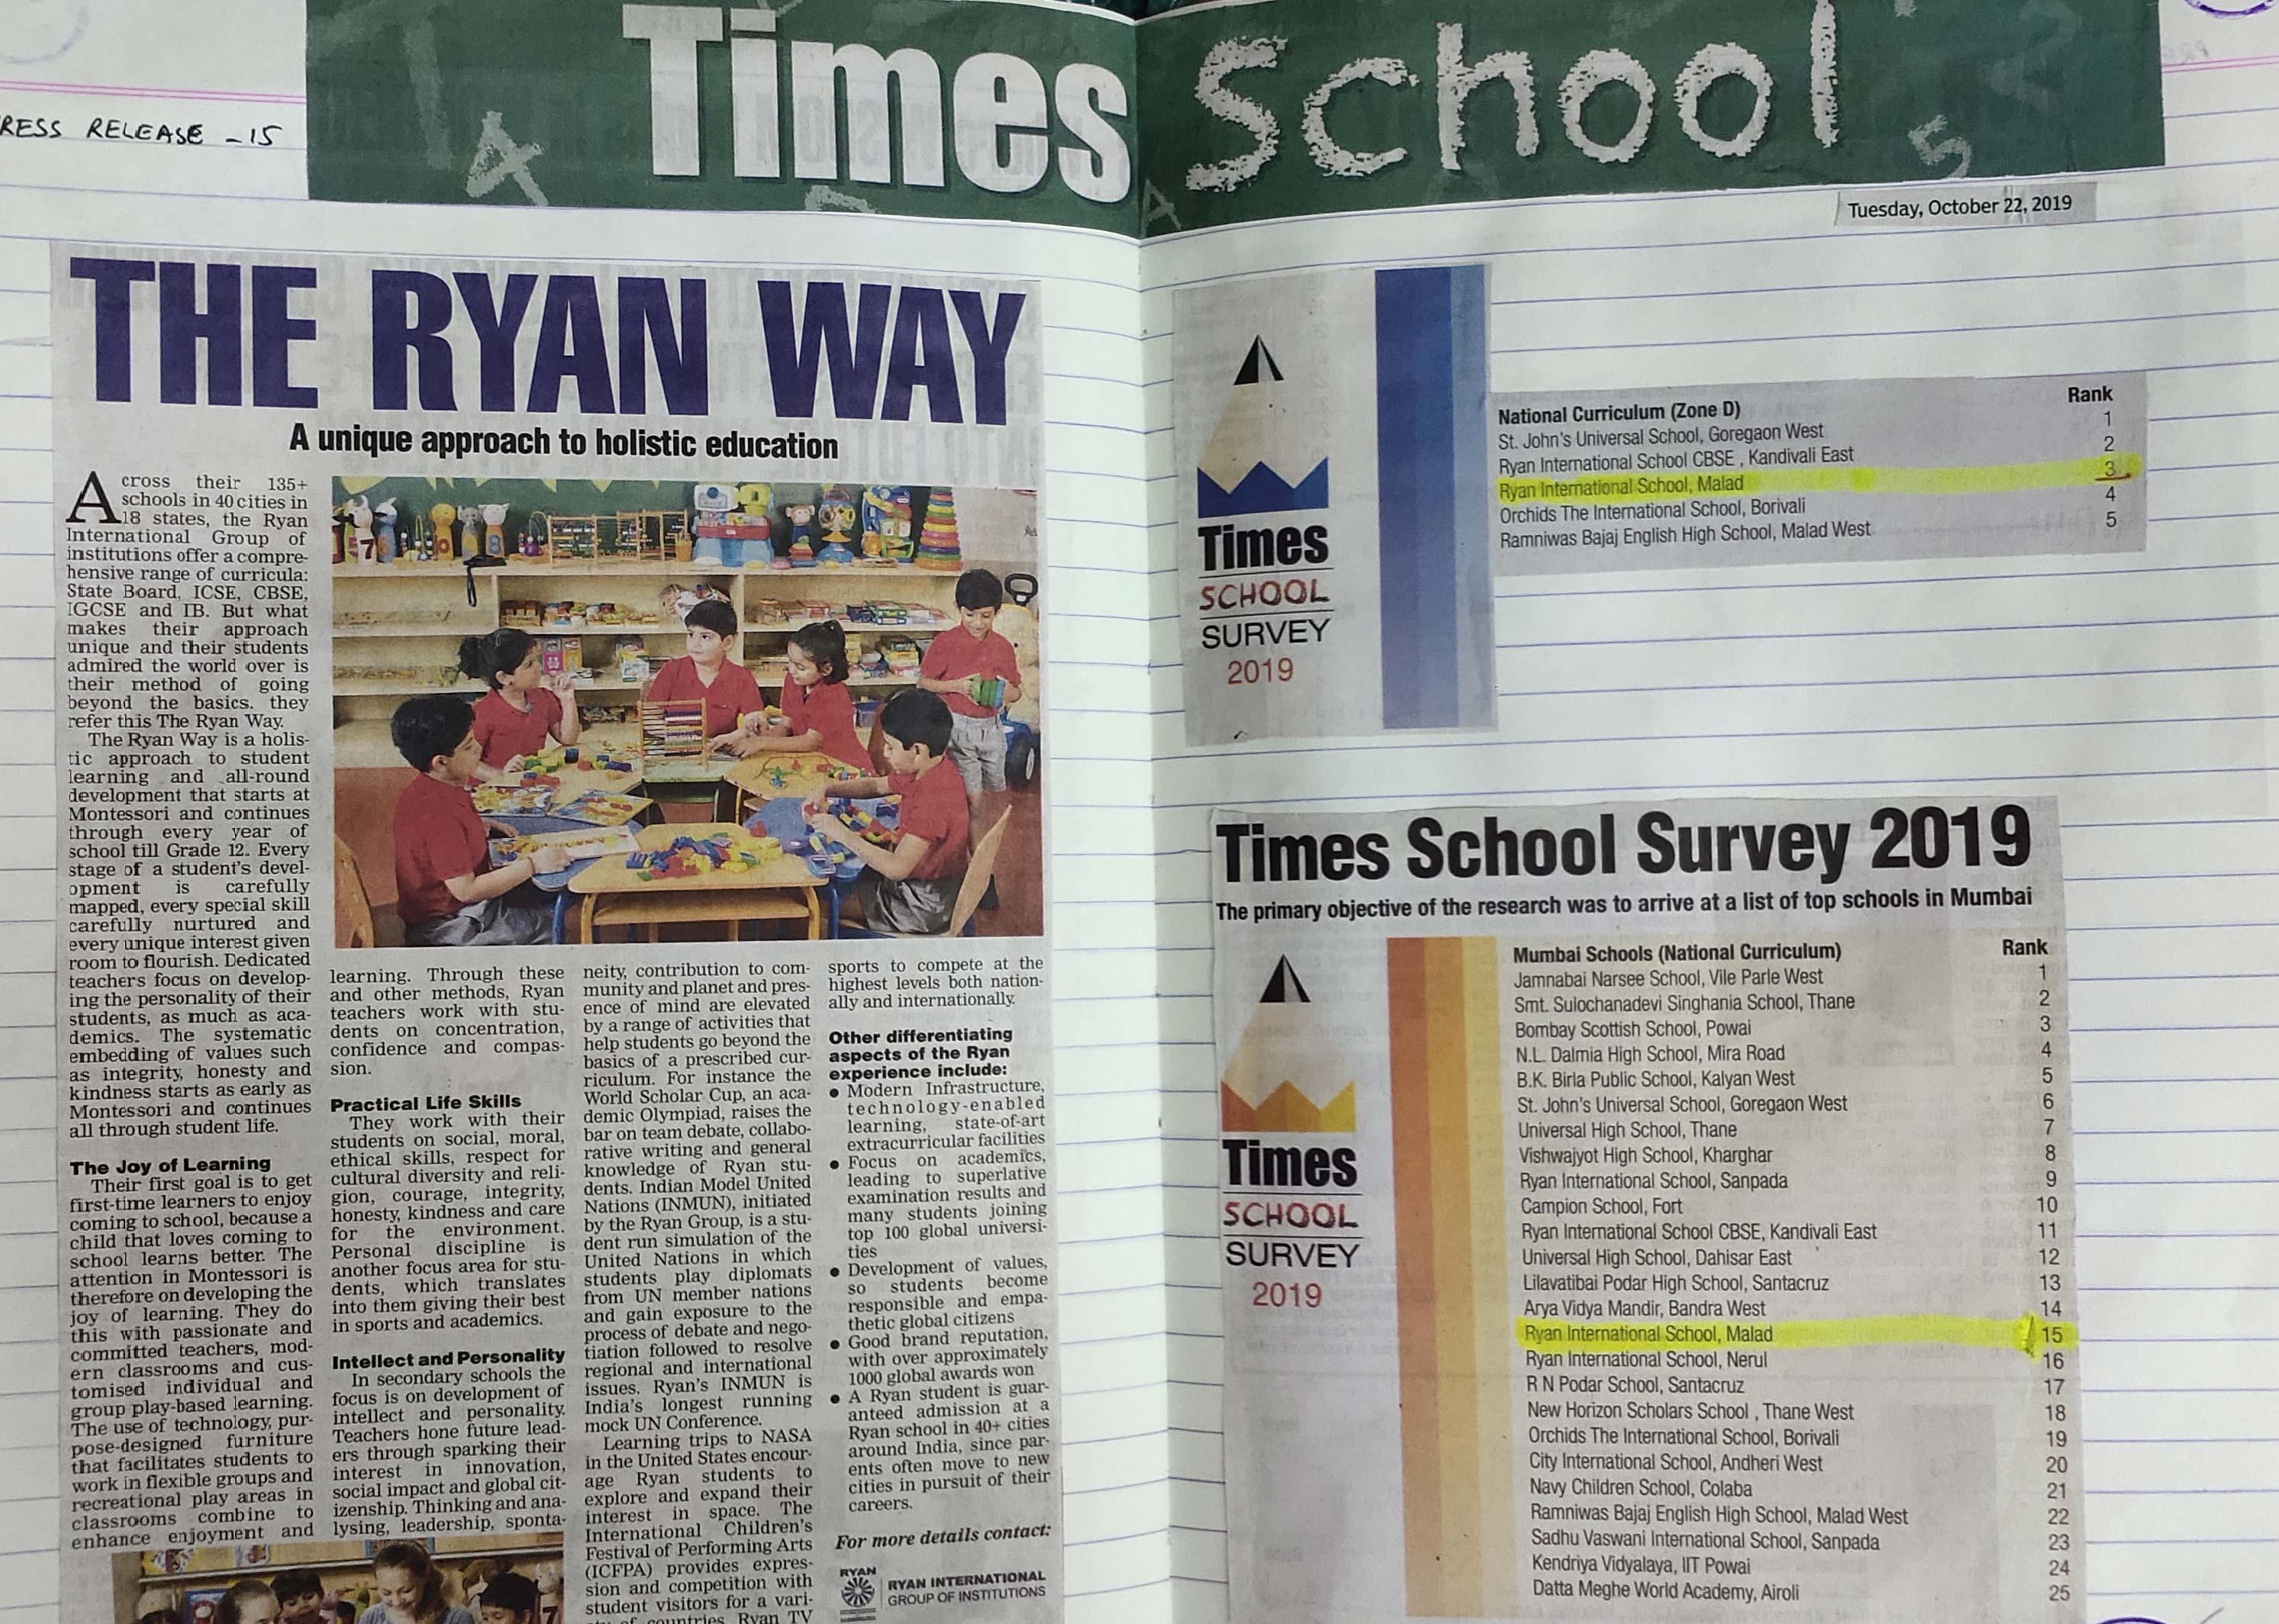 An article under the name “Times School Survey 2019” was published in the Times of India